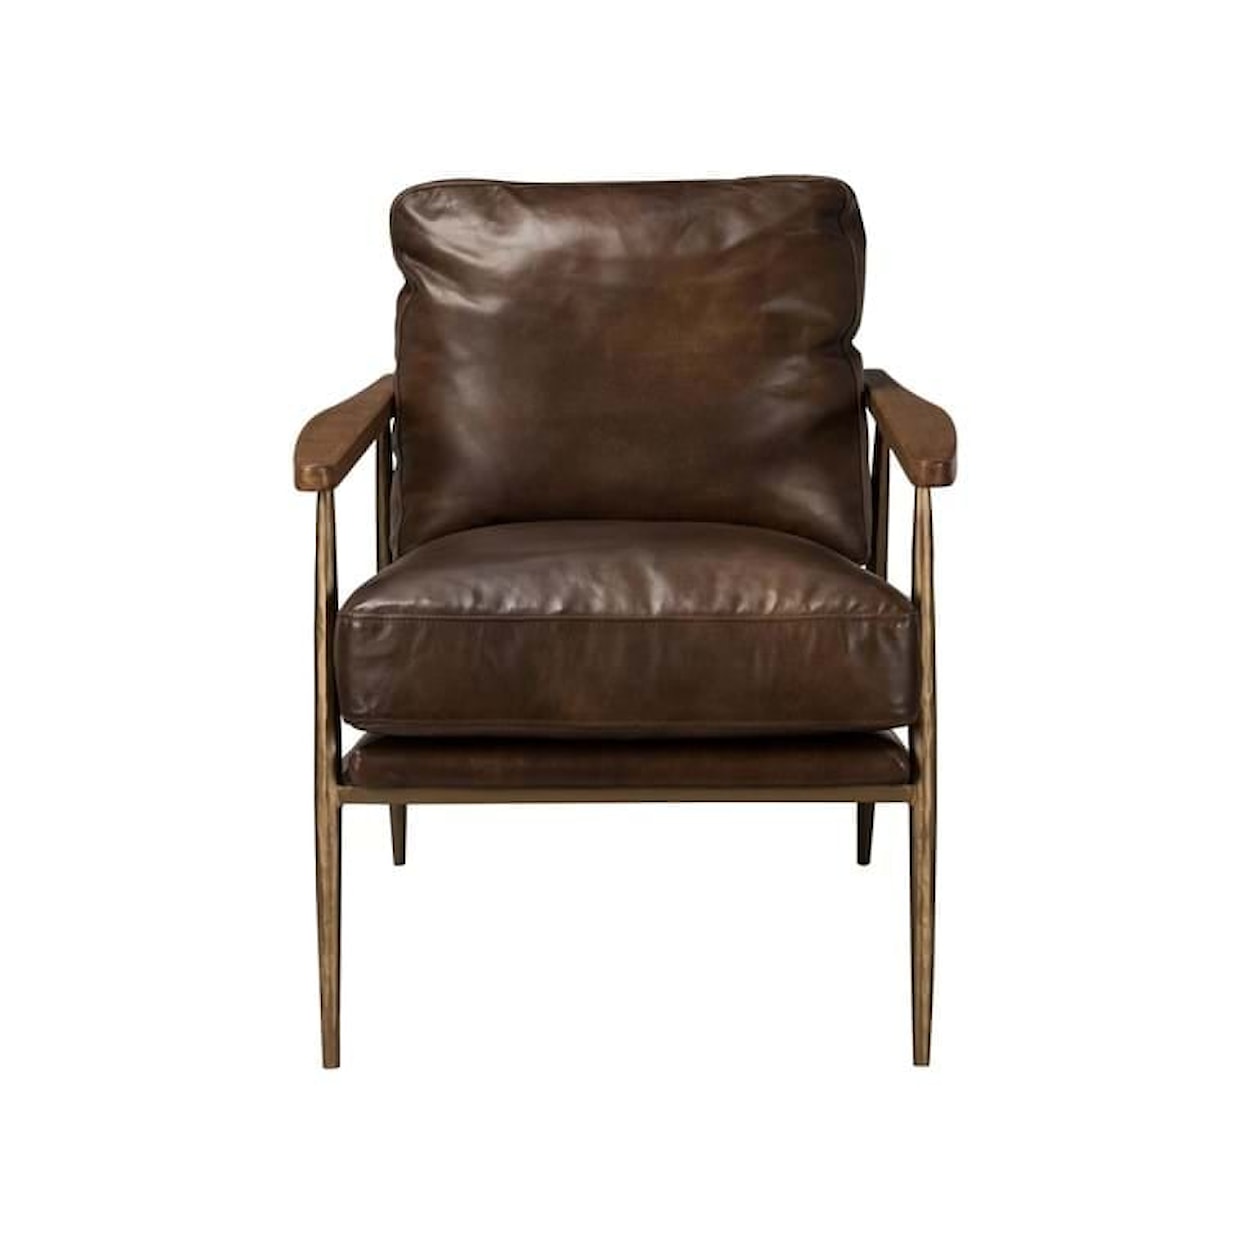 Classic Home Christopher CHRISTOPHER CLUB CHAIR ANTIQUE BROWN